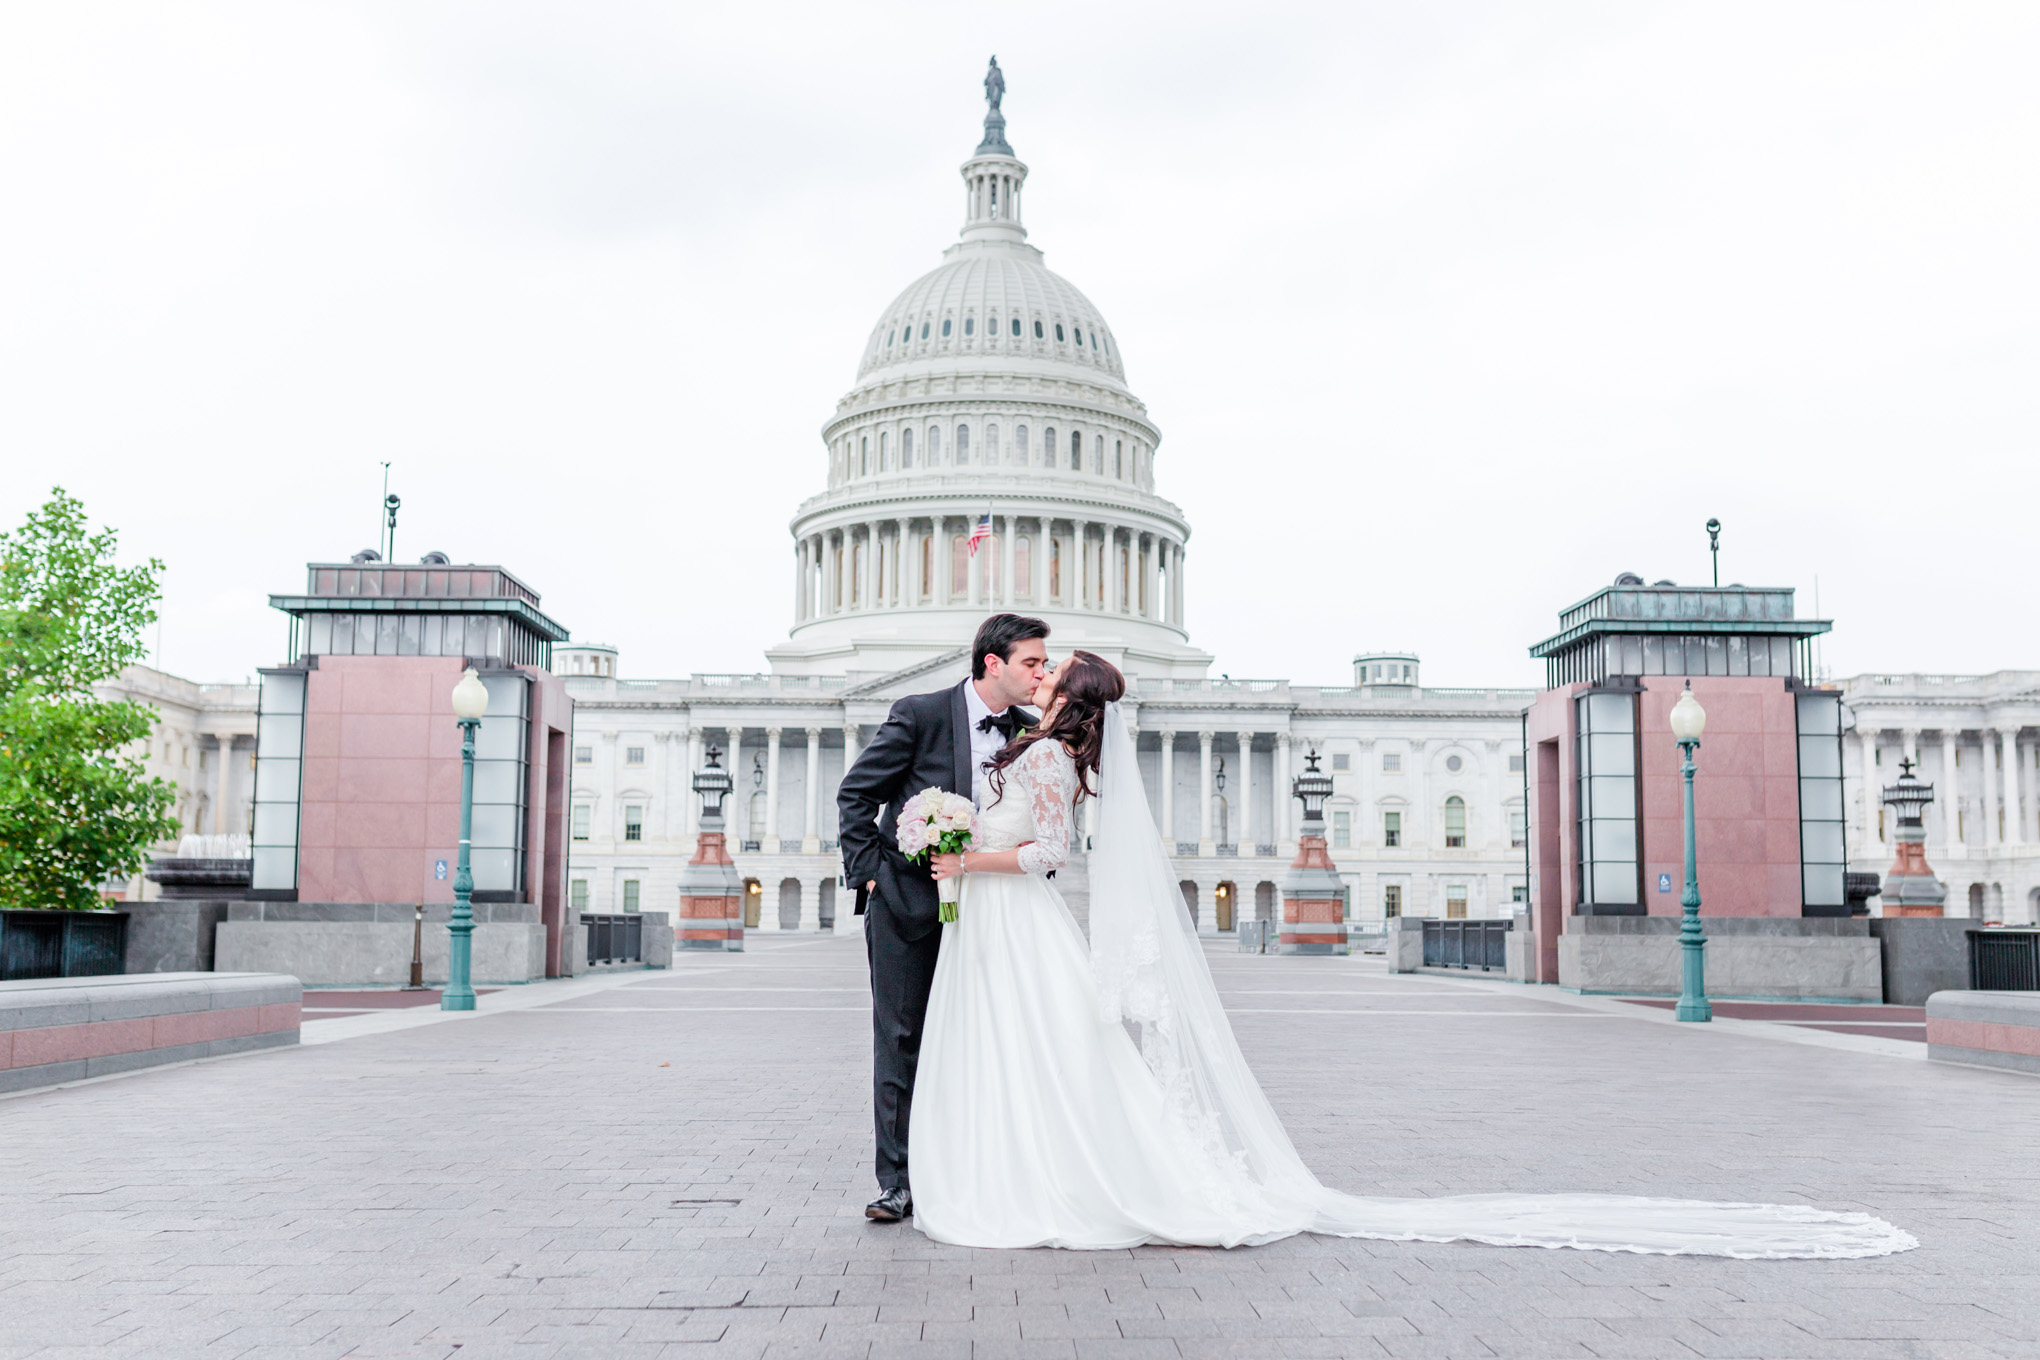 your wedding photography investment, wedding photography, wedding planning, wedding photography planning, photography investment, D.C. wedding, church wedding, D.C. bride, D.C. couple, Capitol Hill wedding, bride and groom portraits